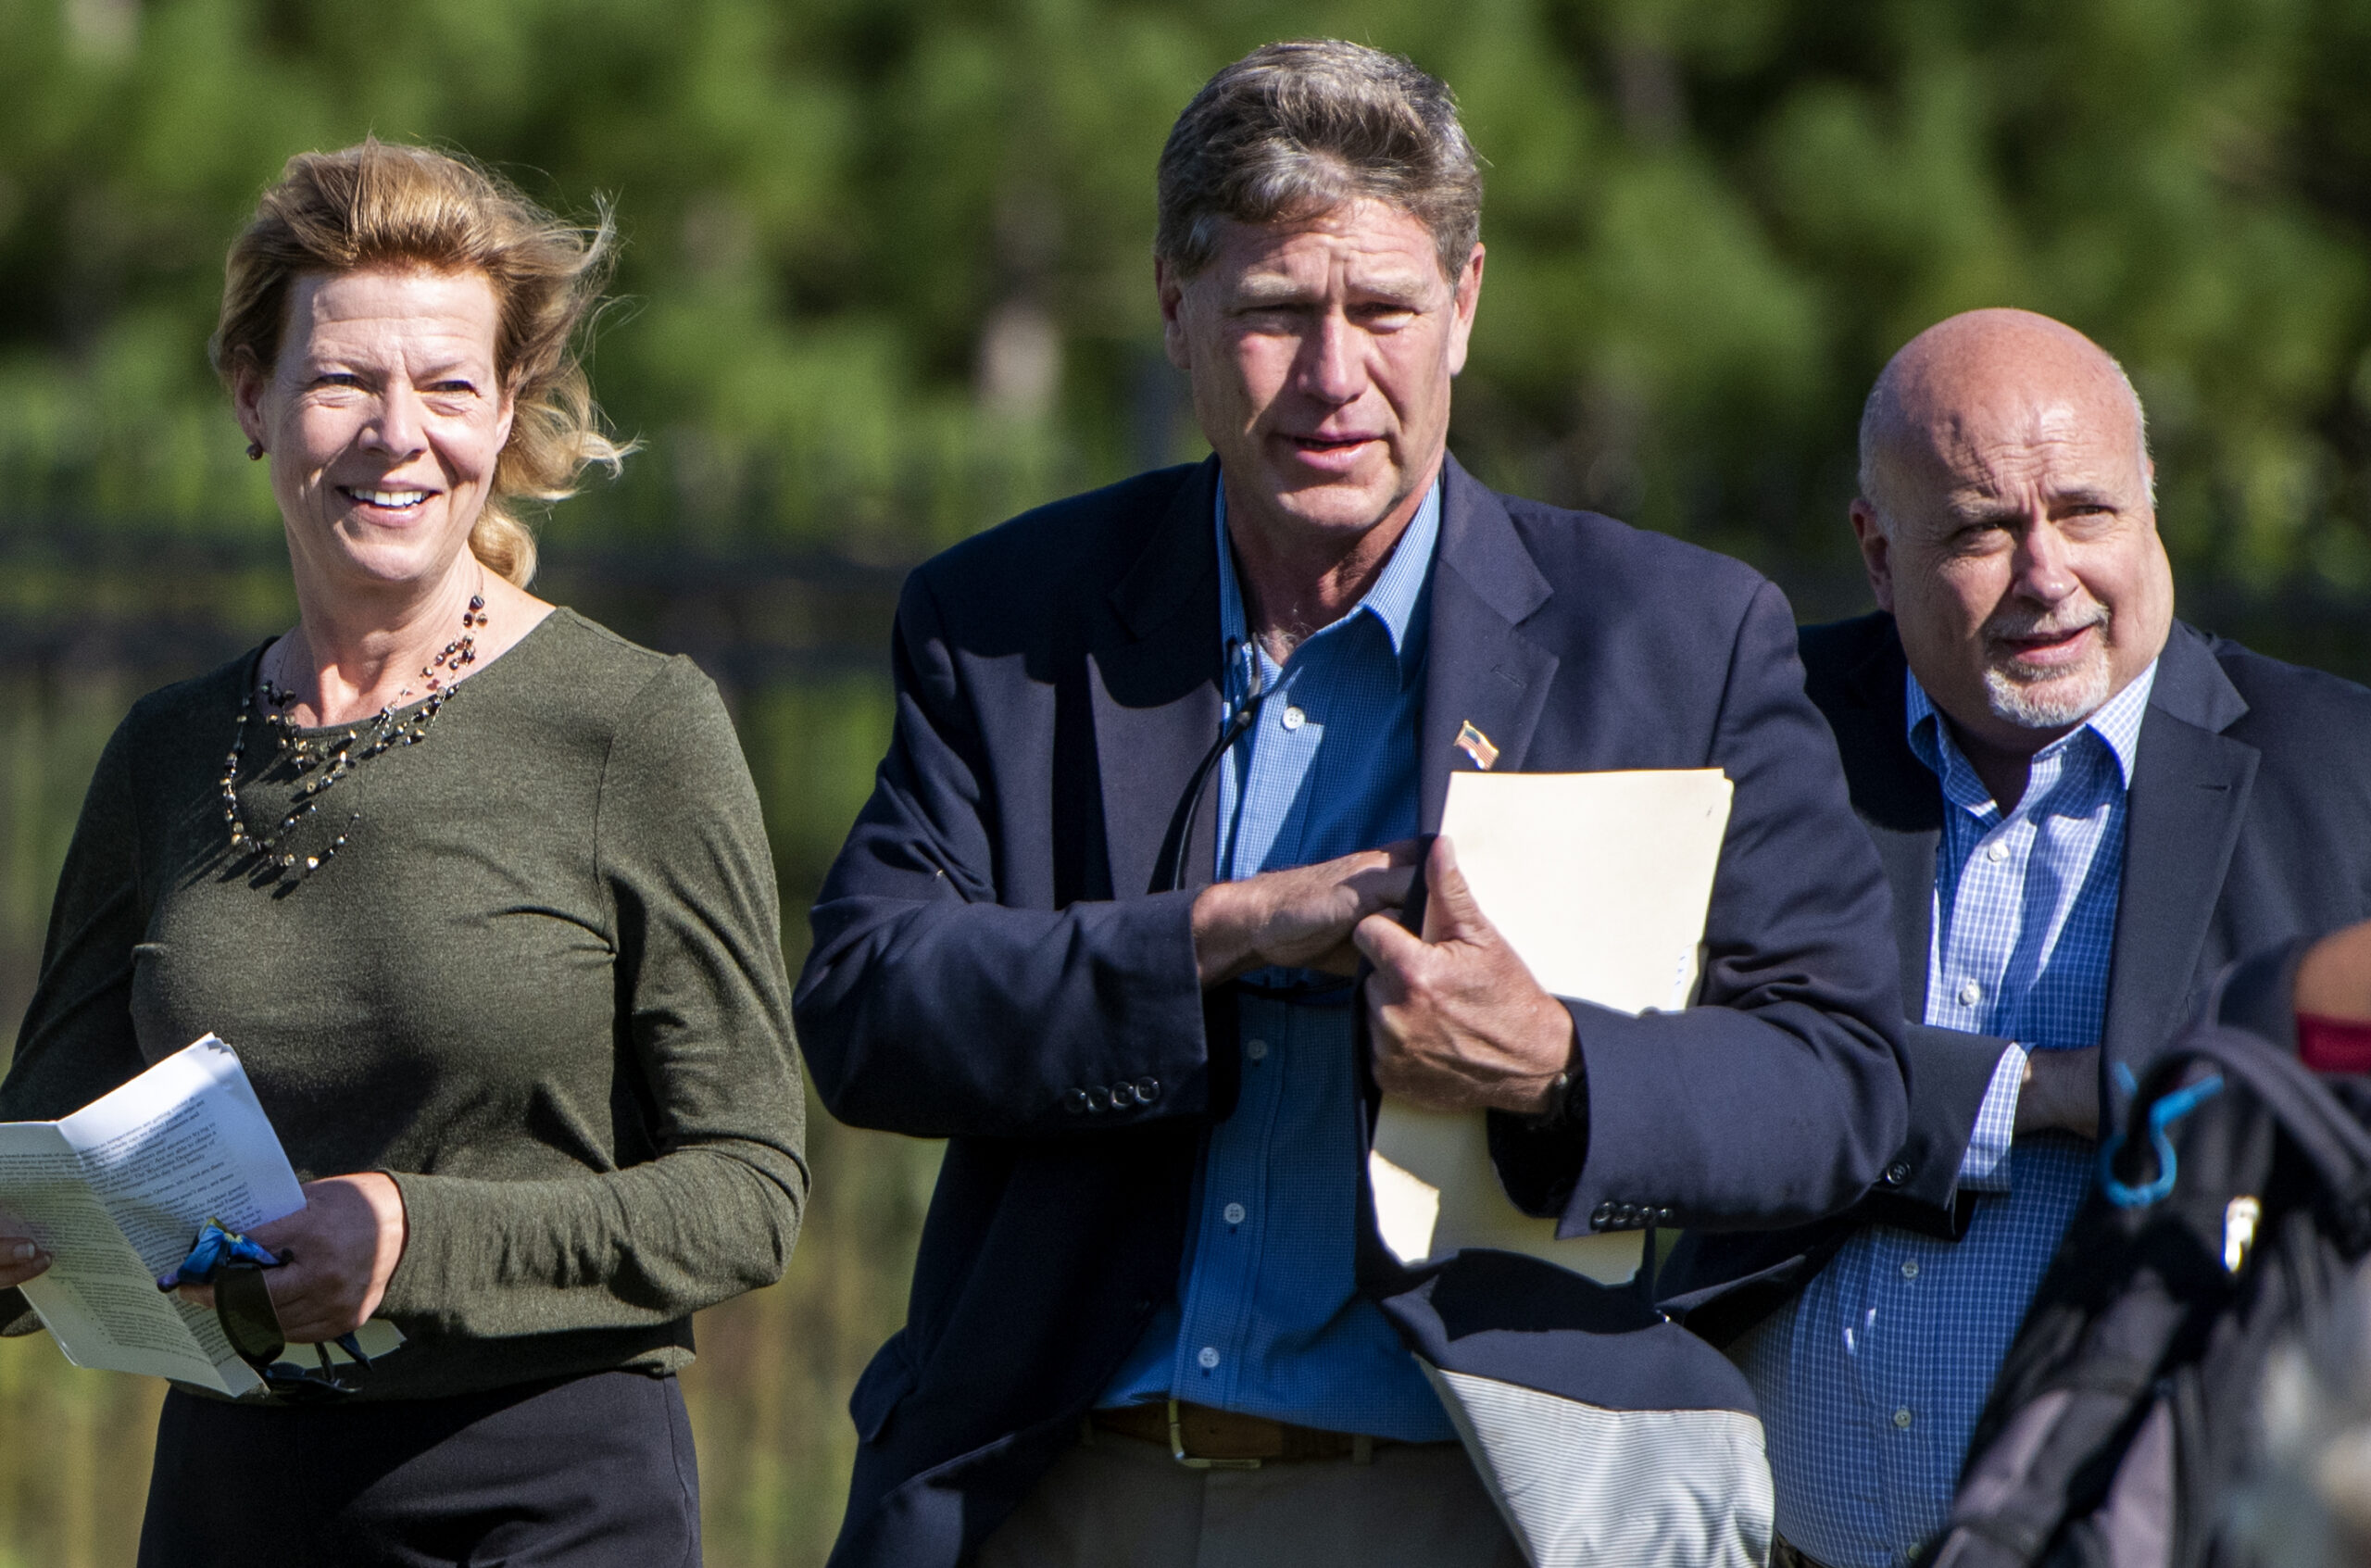 Sen. Baldwin, Rep. Kind and Rep. Pocan approach an outdoor press conference